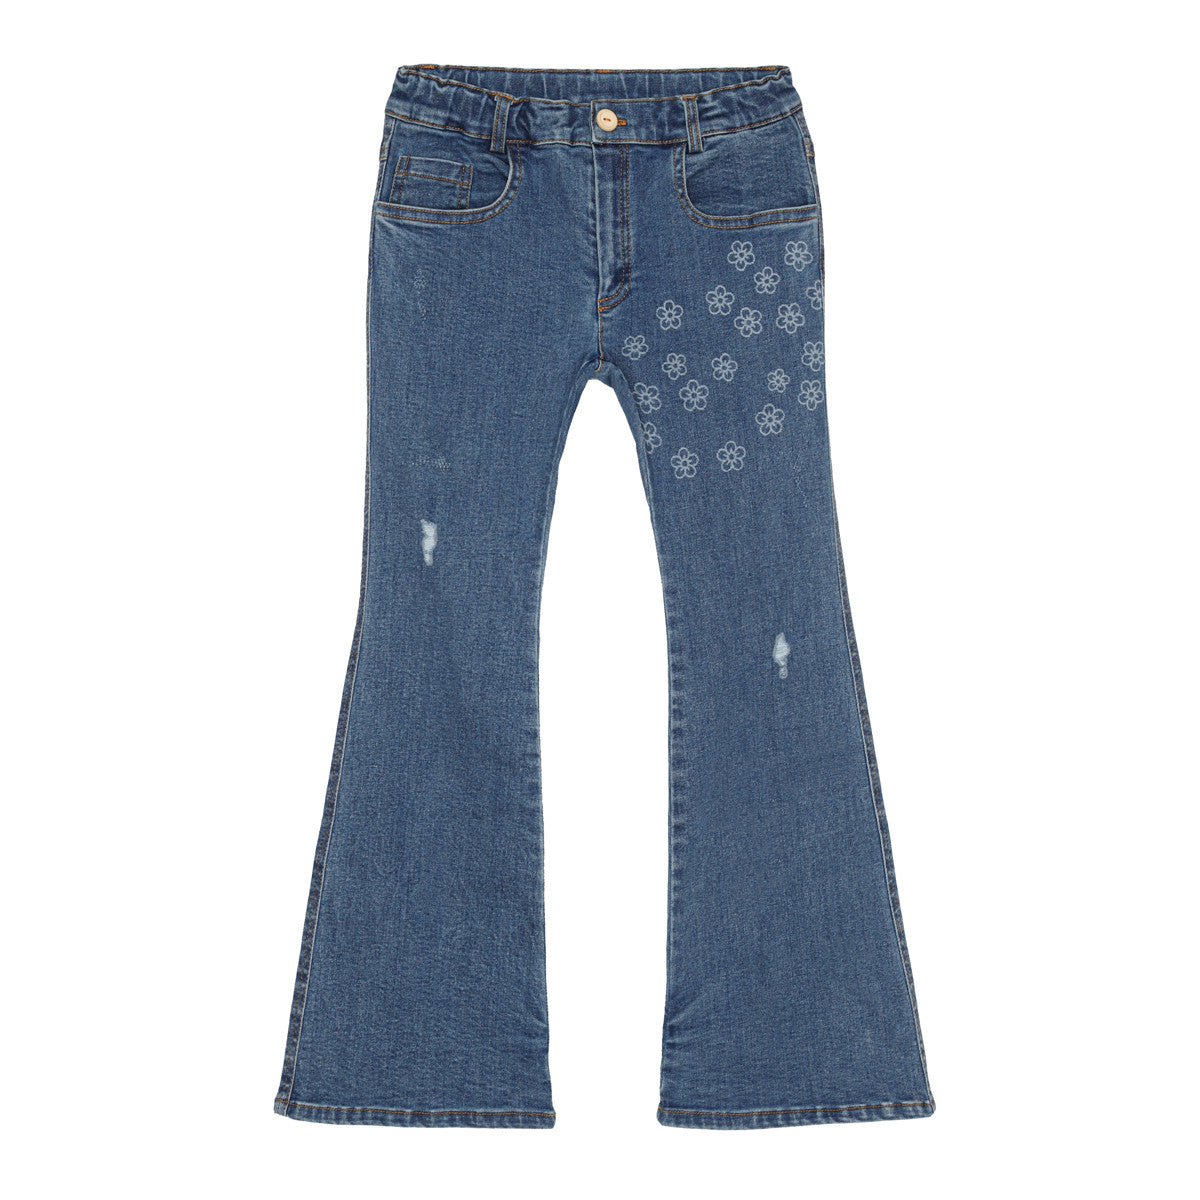 Little Hedonist 5-pocket flared pants in Denim Authentic Indigo, slim fit thighs, for boys and girls. Made from the softest organic fabric. Sustainable unisex kids clothing.